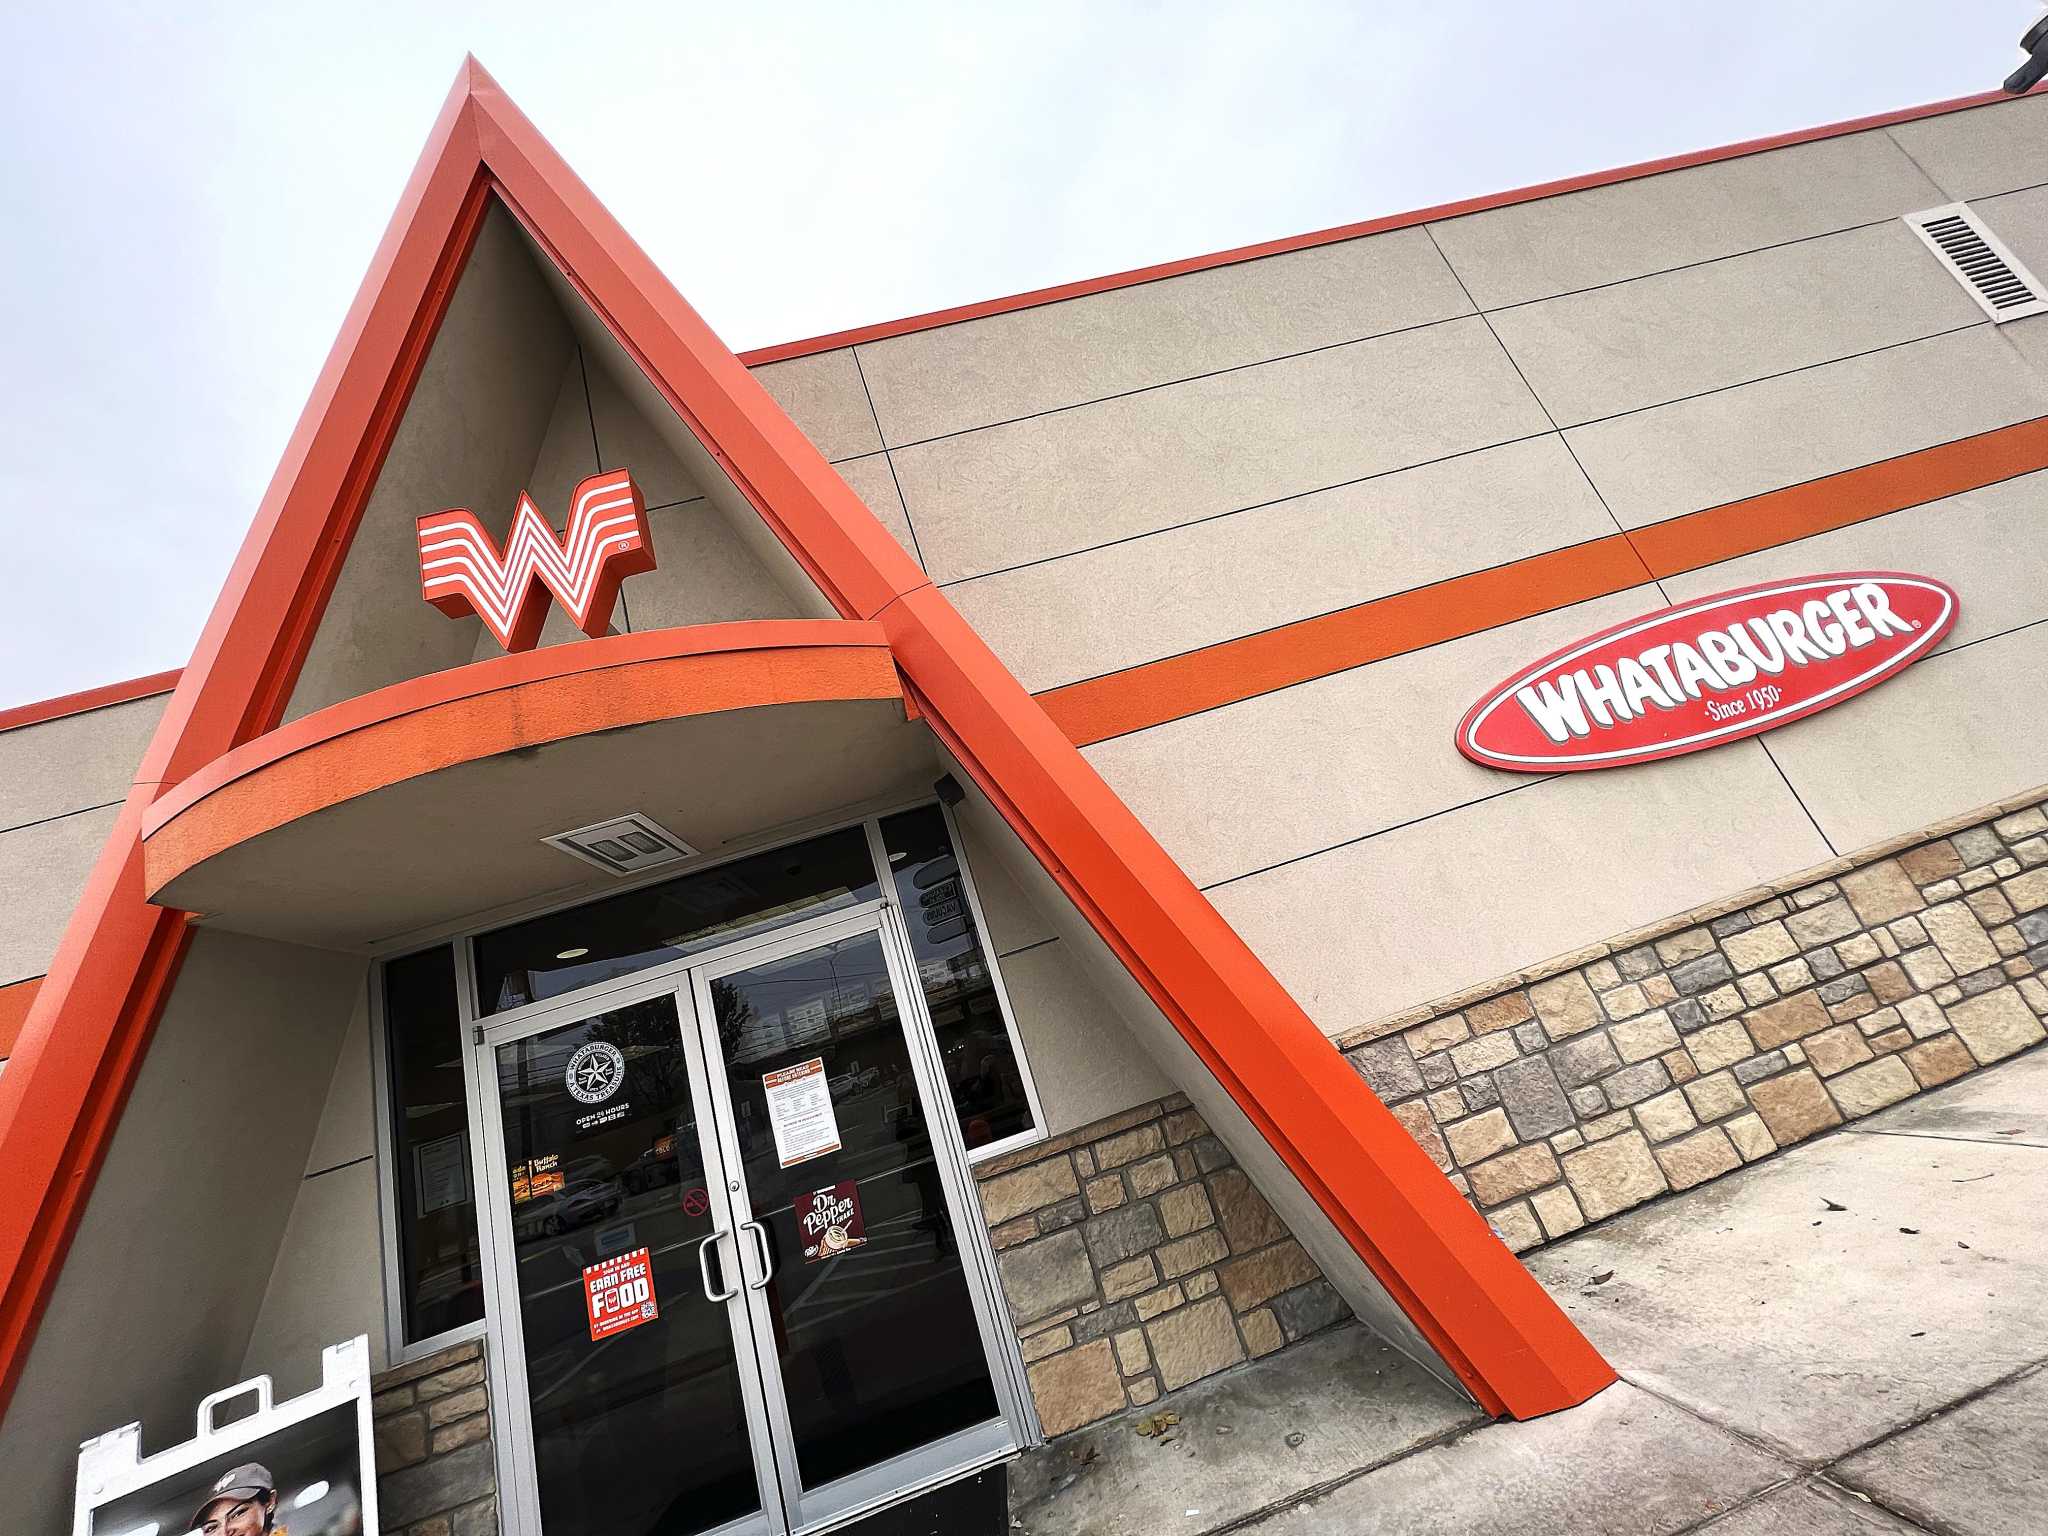 Girl, 3, surprises Whataburger workers with her 'Whatagirl